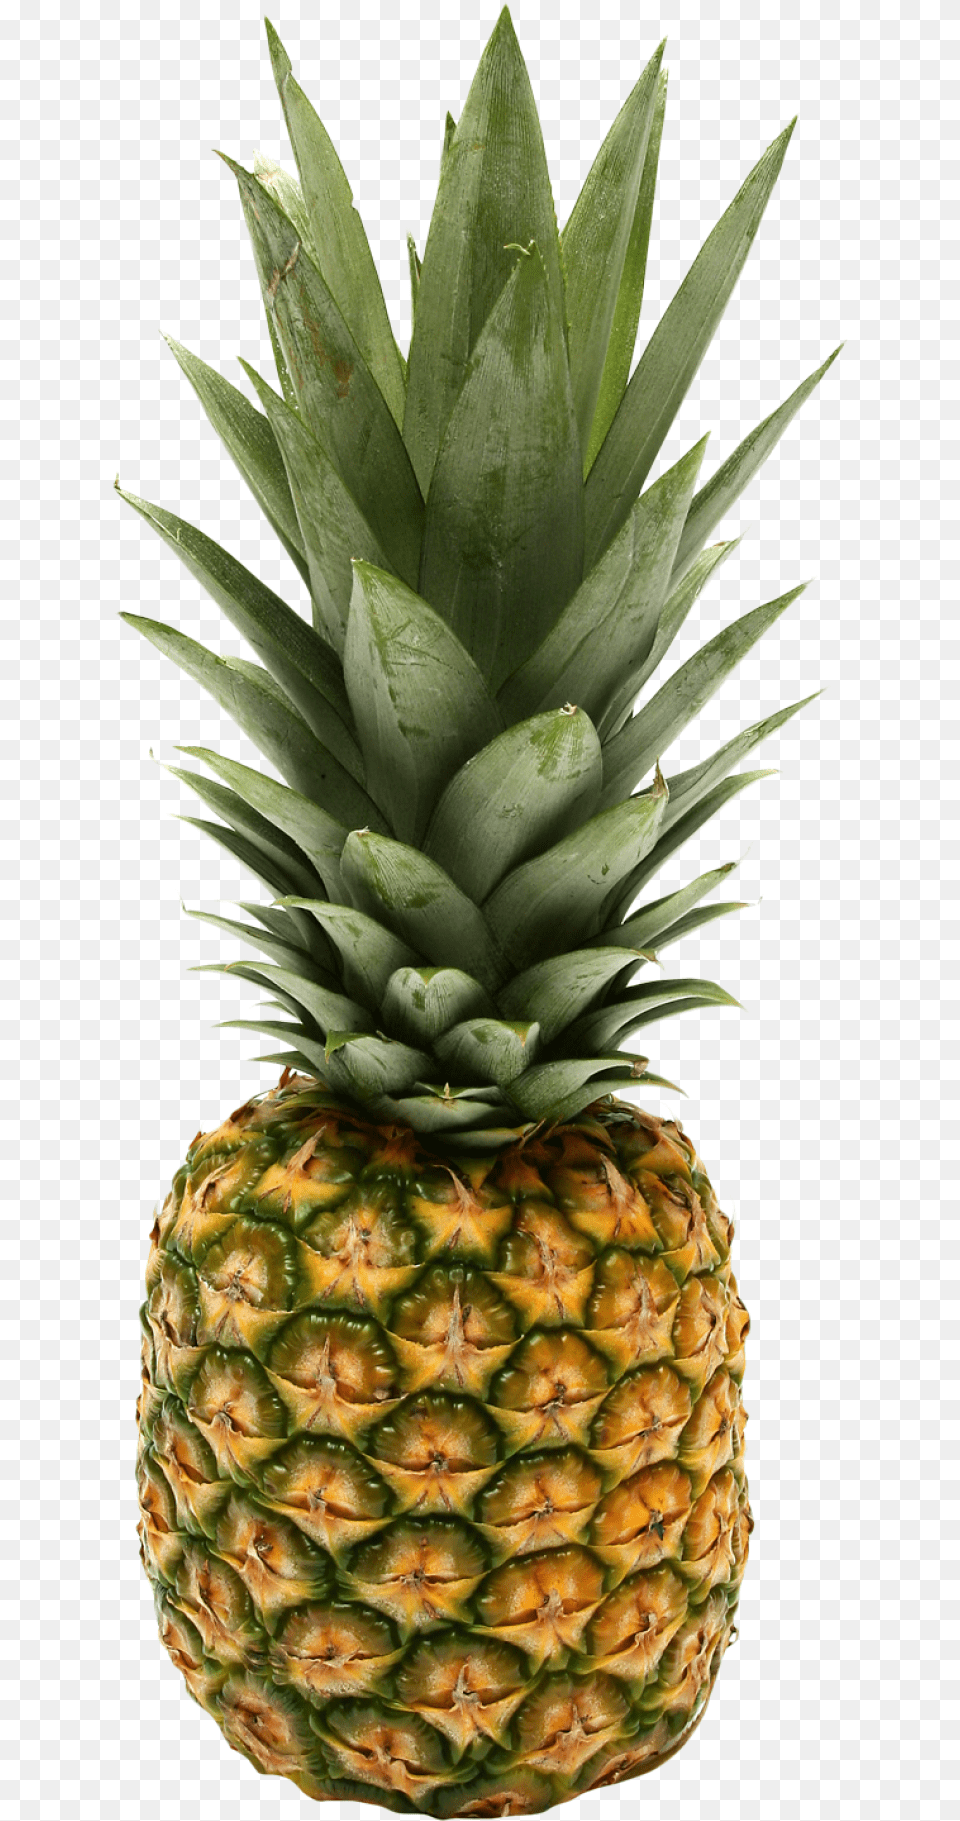 Two Pineapple Purepng Free Transparent Cc0 Rick And Morty Fruit, Food, Plant, Produce Png Image